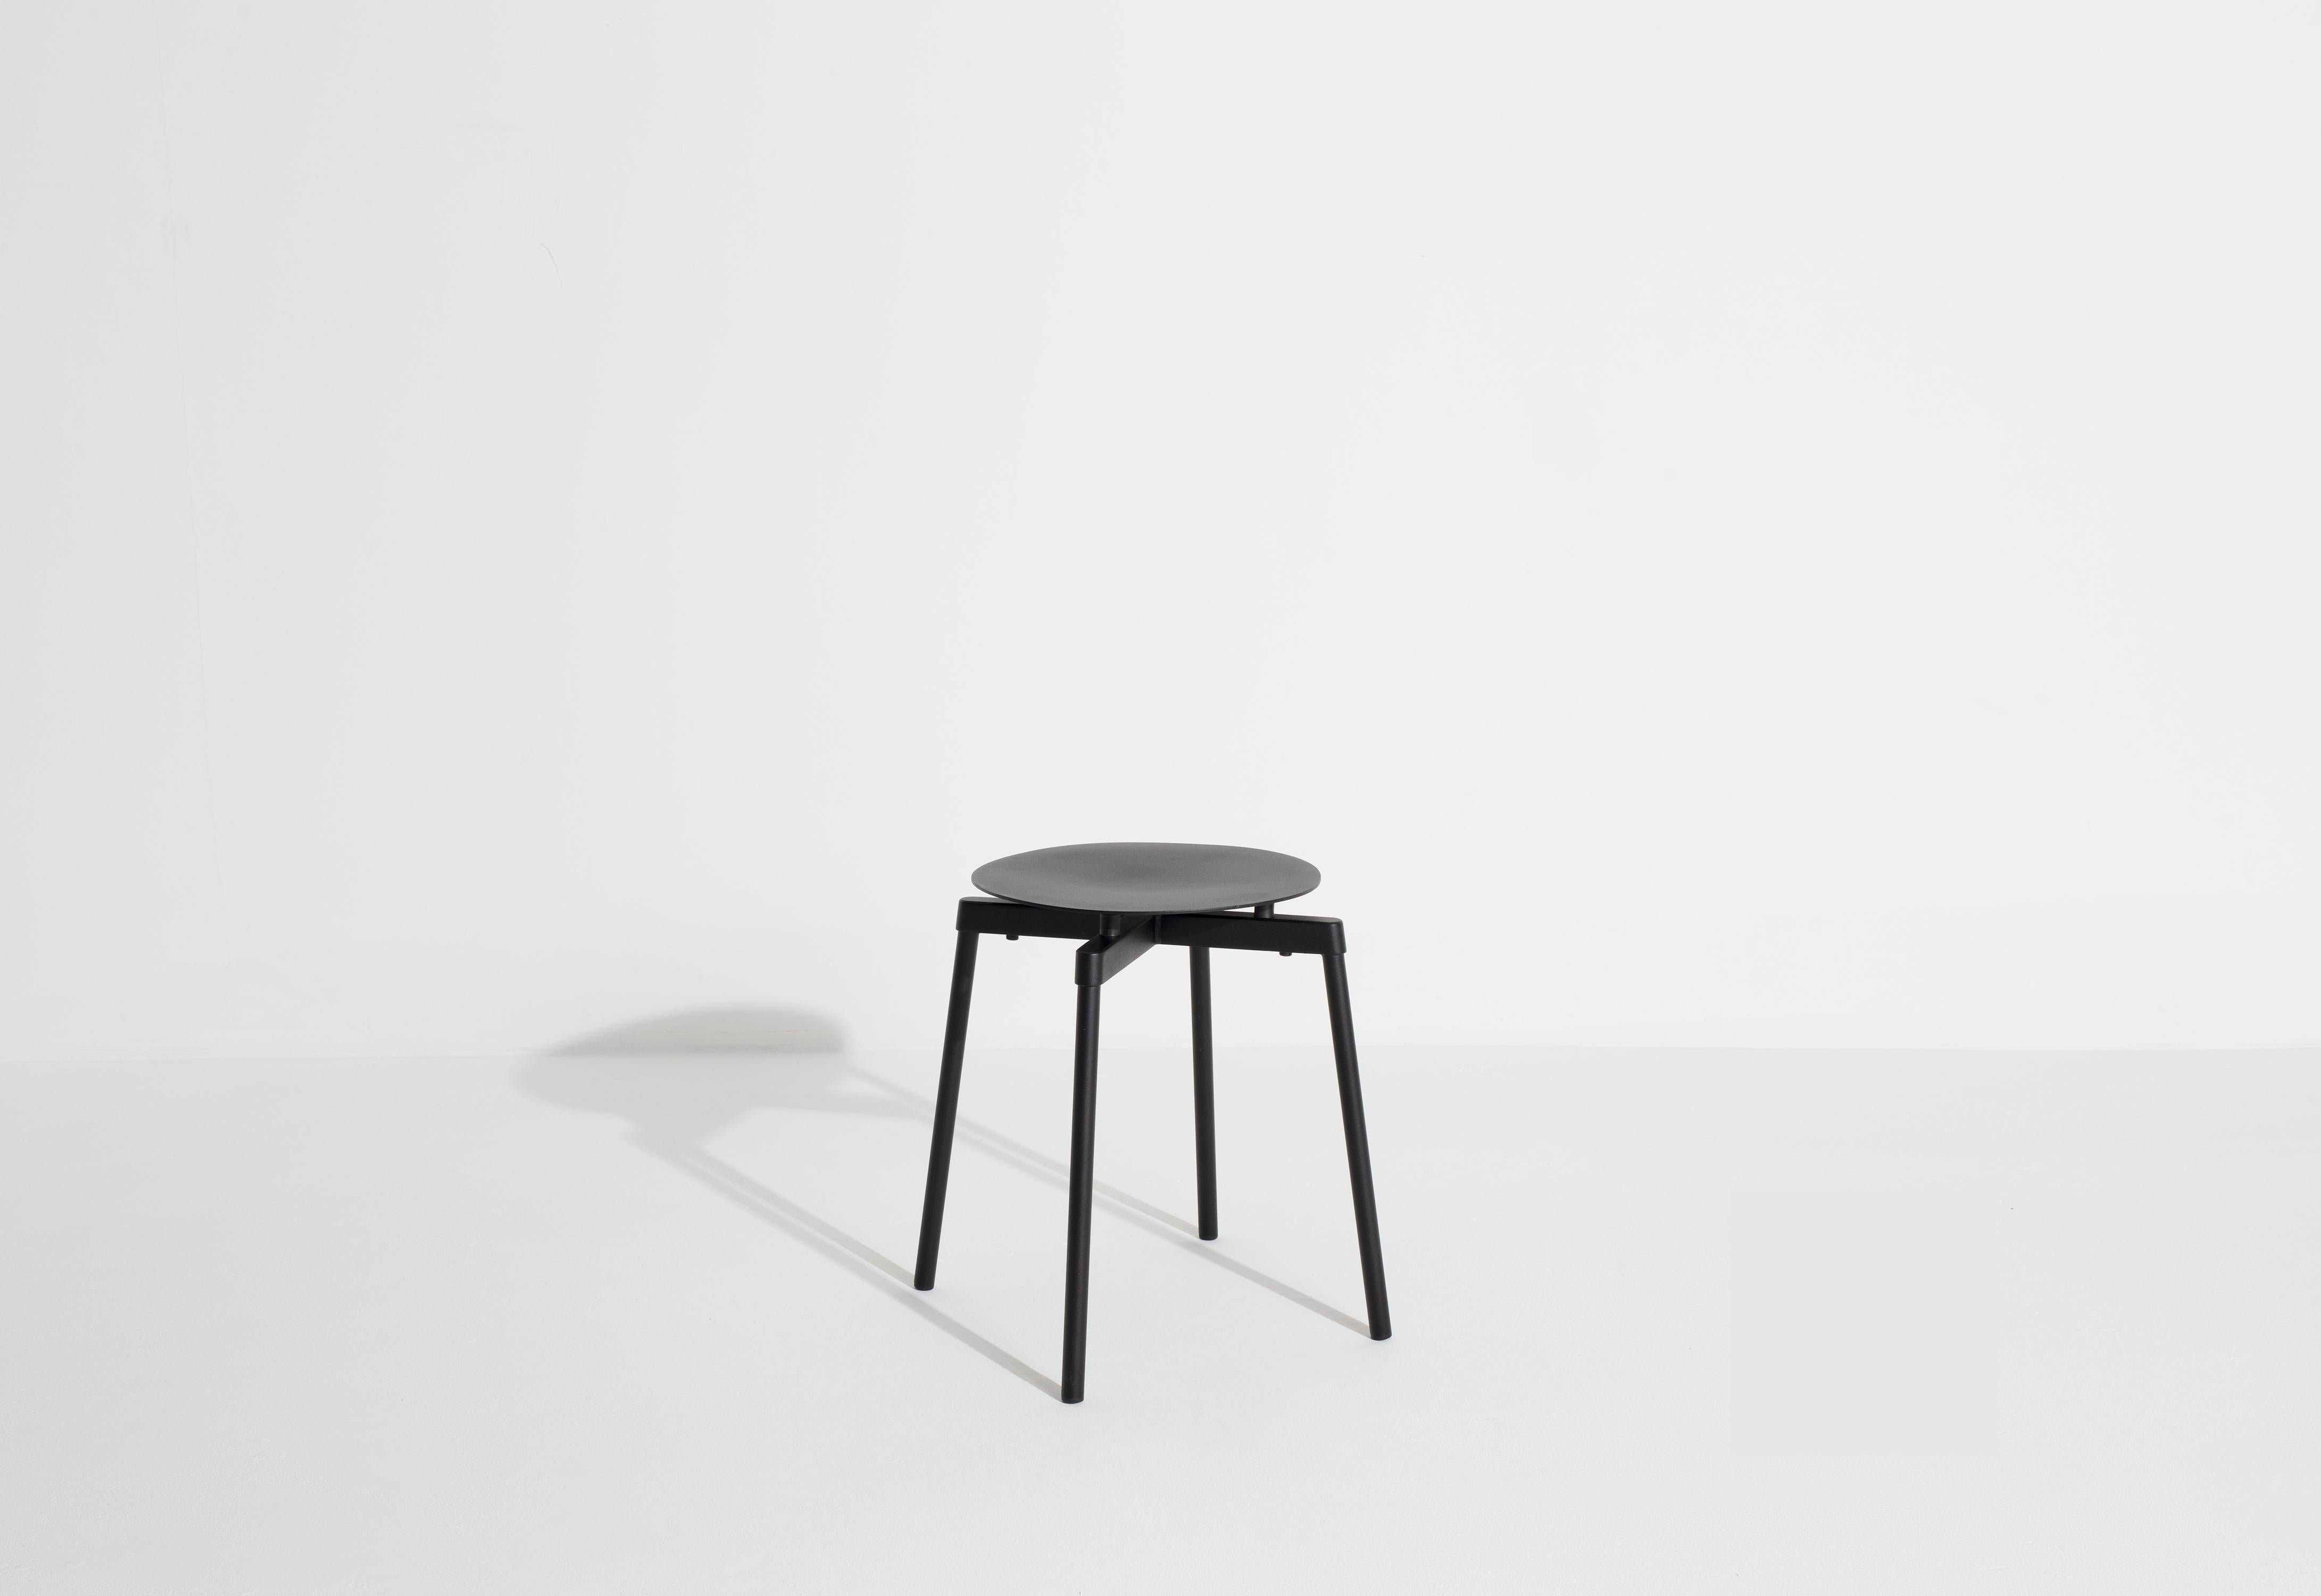 Chinese Petite Friture Fromme Stool in Black Aluminium by Tom Chung, 2020 For Sale